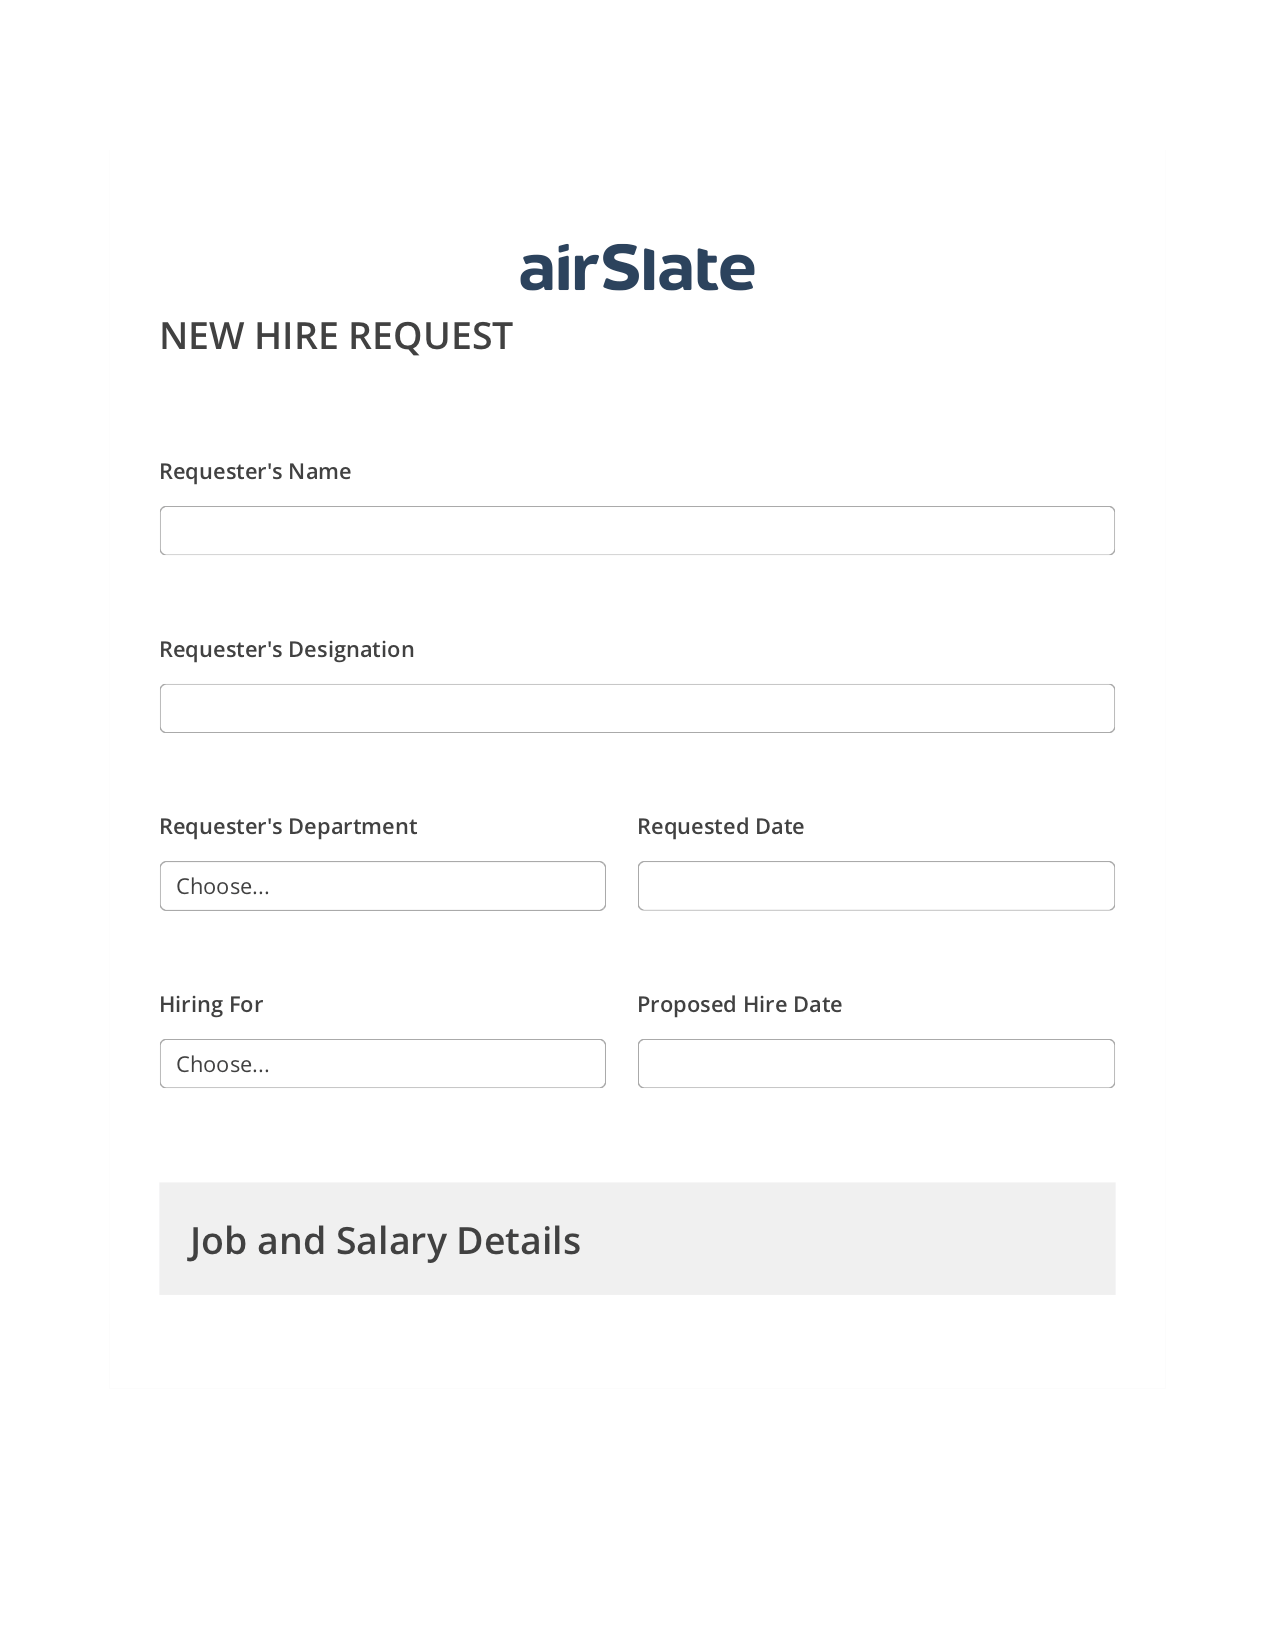 Hiring Request Workflow Pre-fill from Salesforce Records Bot, Unassign Role Bot, Export to NetSuite Bot